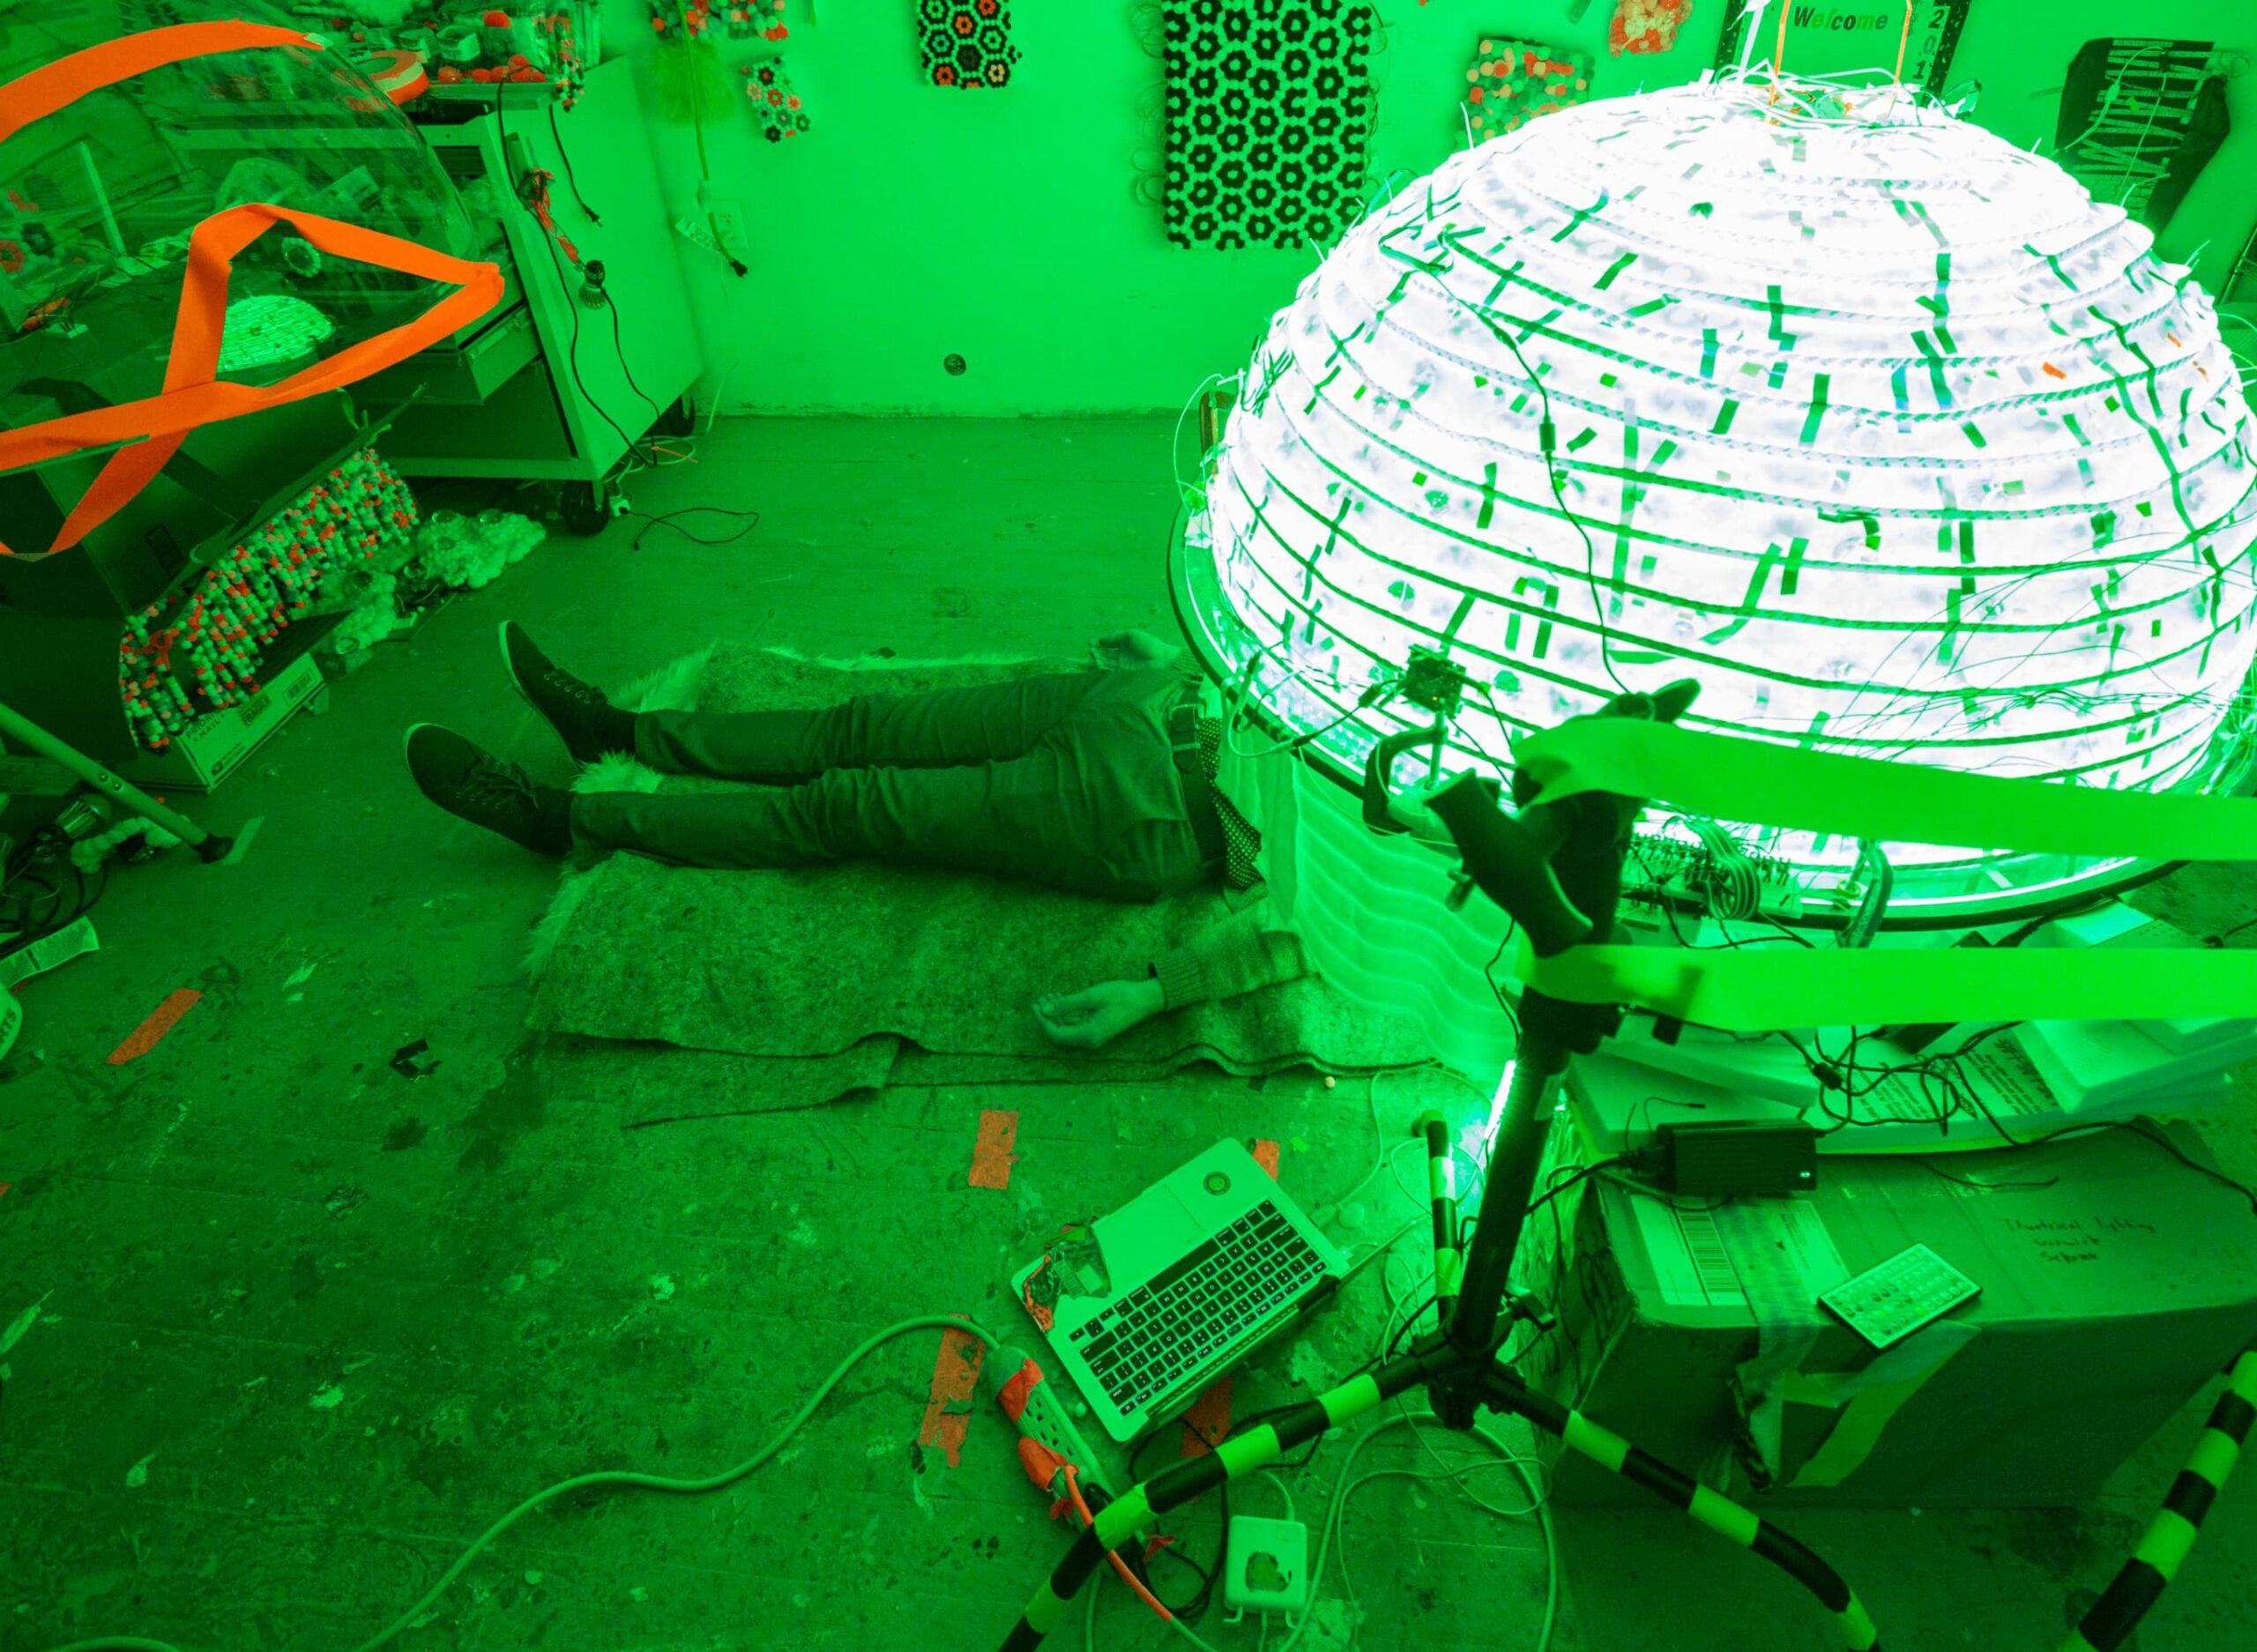 Room illuminated in green light, a person lying on the floor and a large illuminated ball.